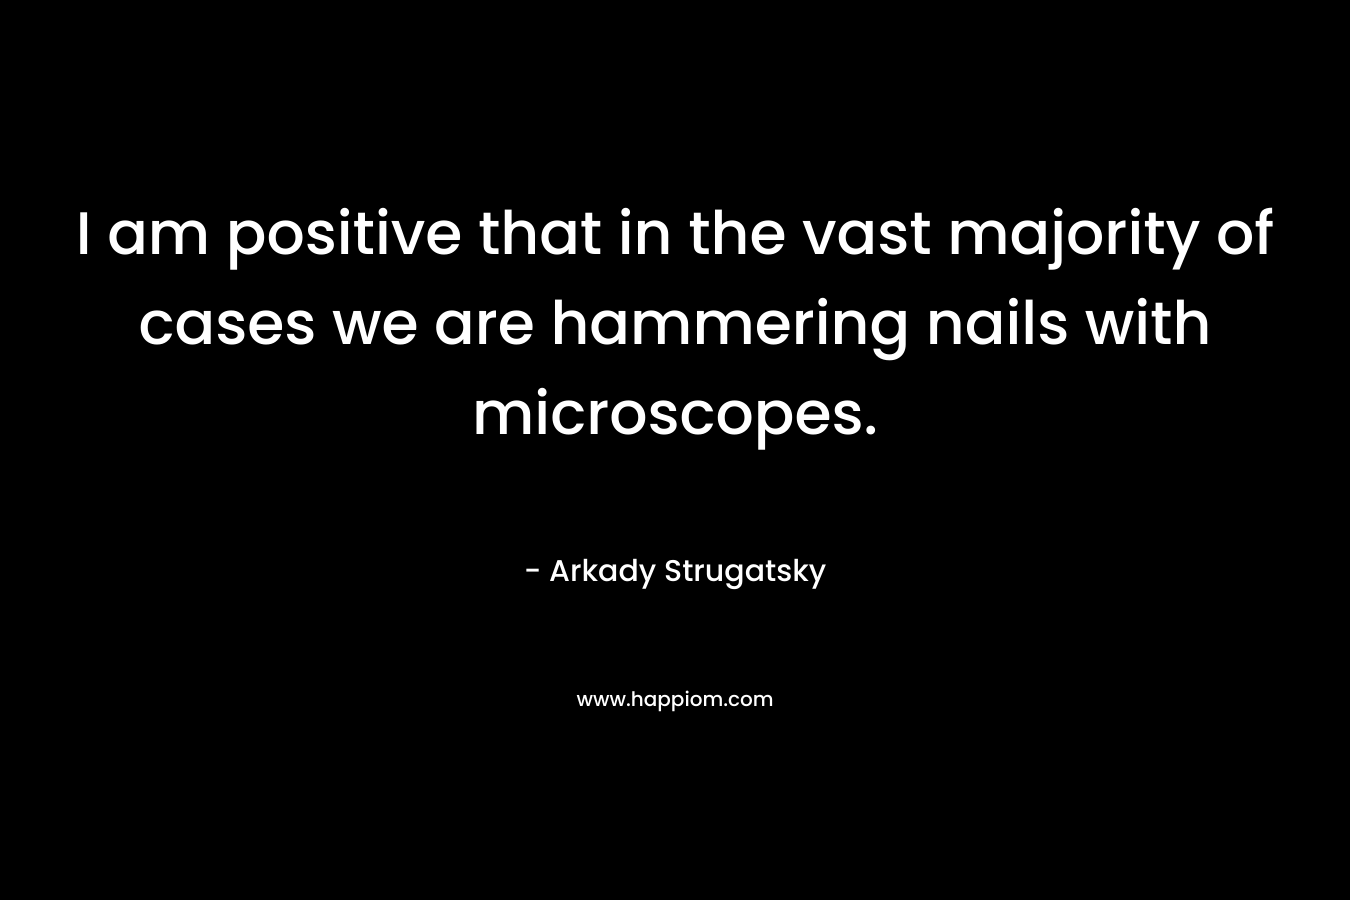 I am positive that in the vast majority of cases we are hammering nails with microscopes. – Arkady Strugatsky